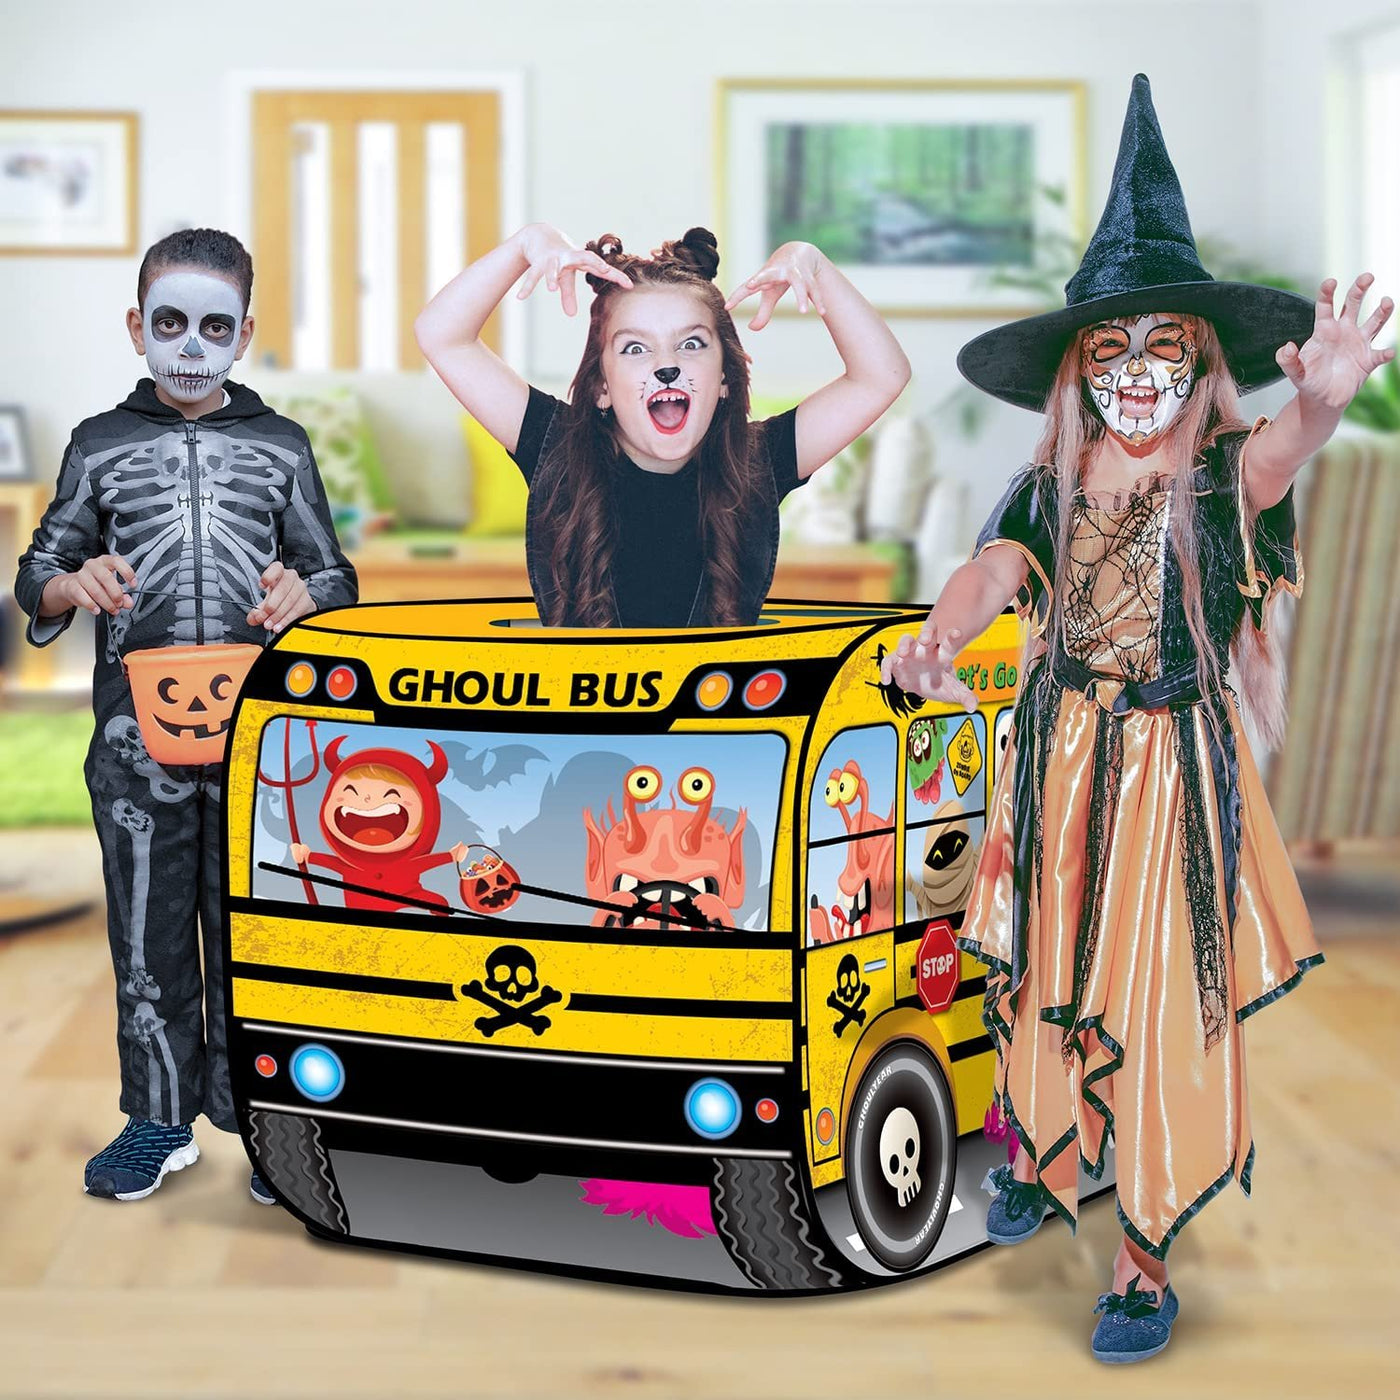 Ghoul School Bus Pop Up Tent, Halloween Tent for Kids with a Carry Bag, Pop Up Play Tent for Hours of Fun, Great for Indoor Halloween Decorations, 43.5 x 28 x 26.5"es